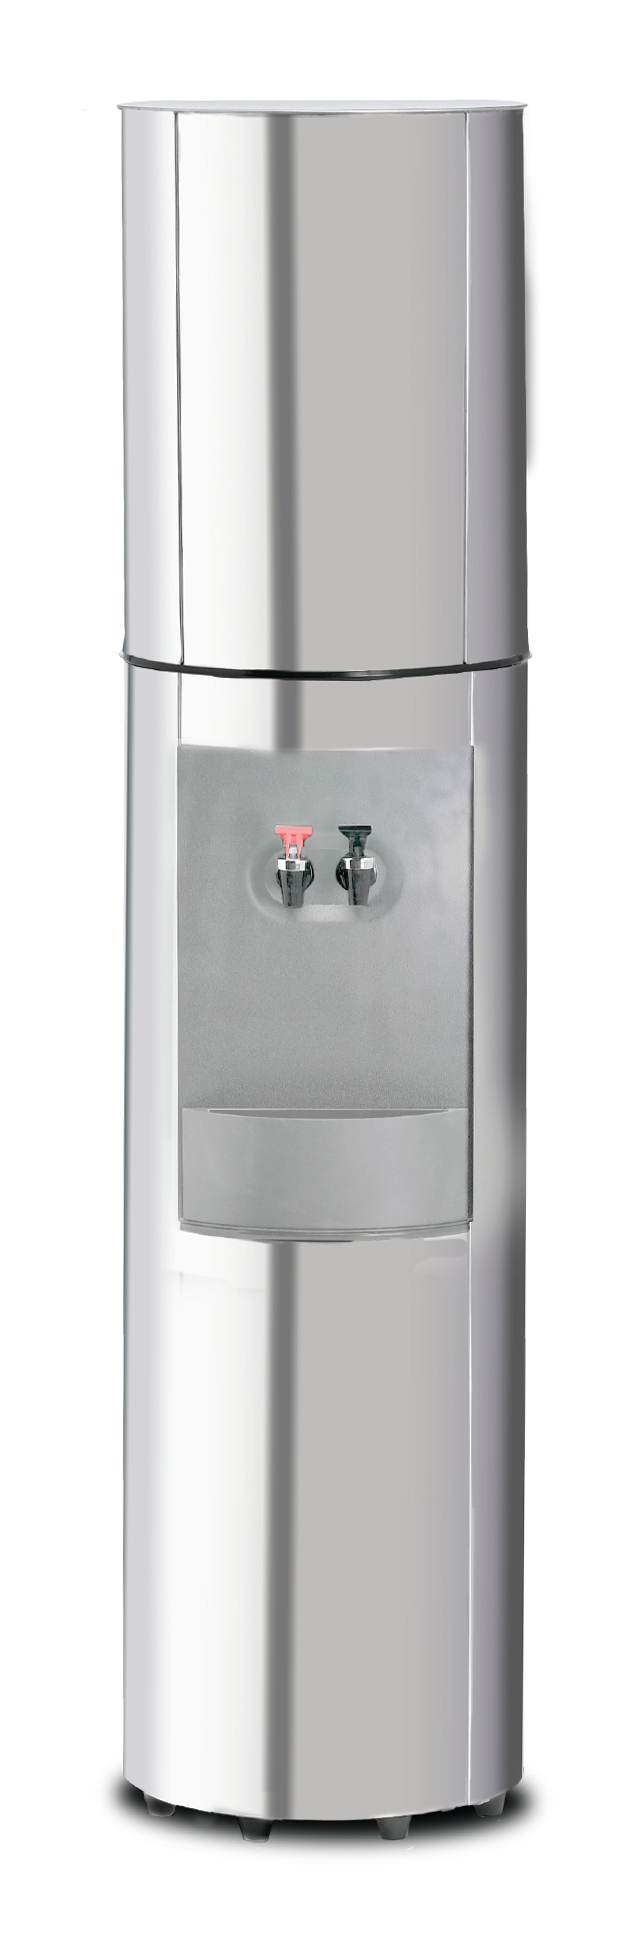 Triple S2 Stainless Steel Water Cooler with Hot & Cold Water